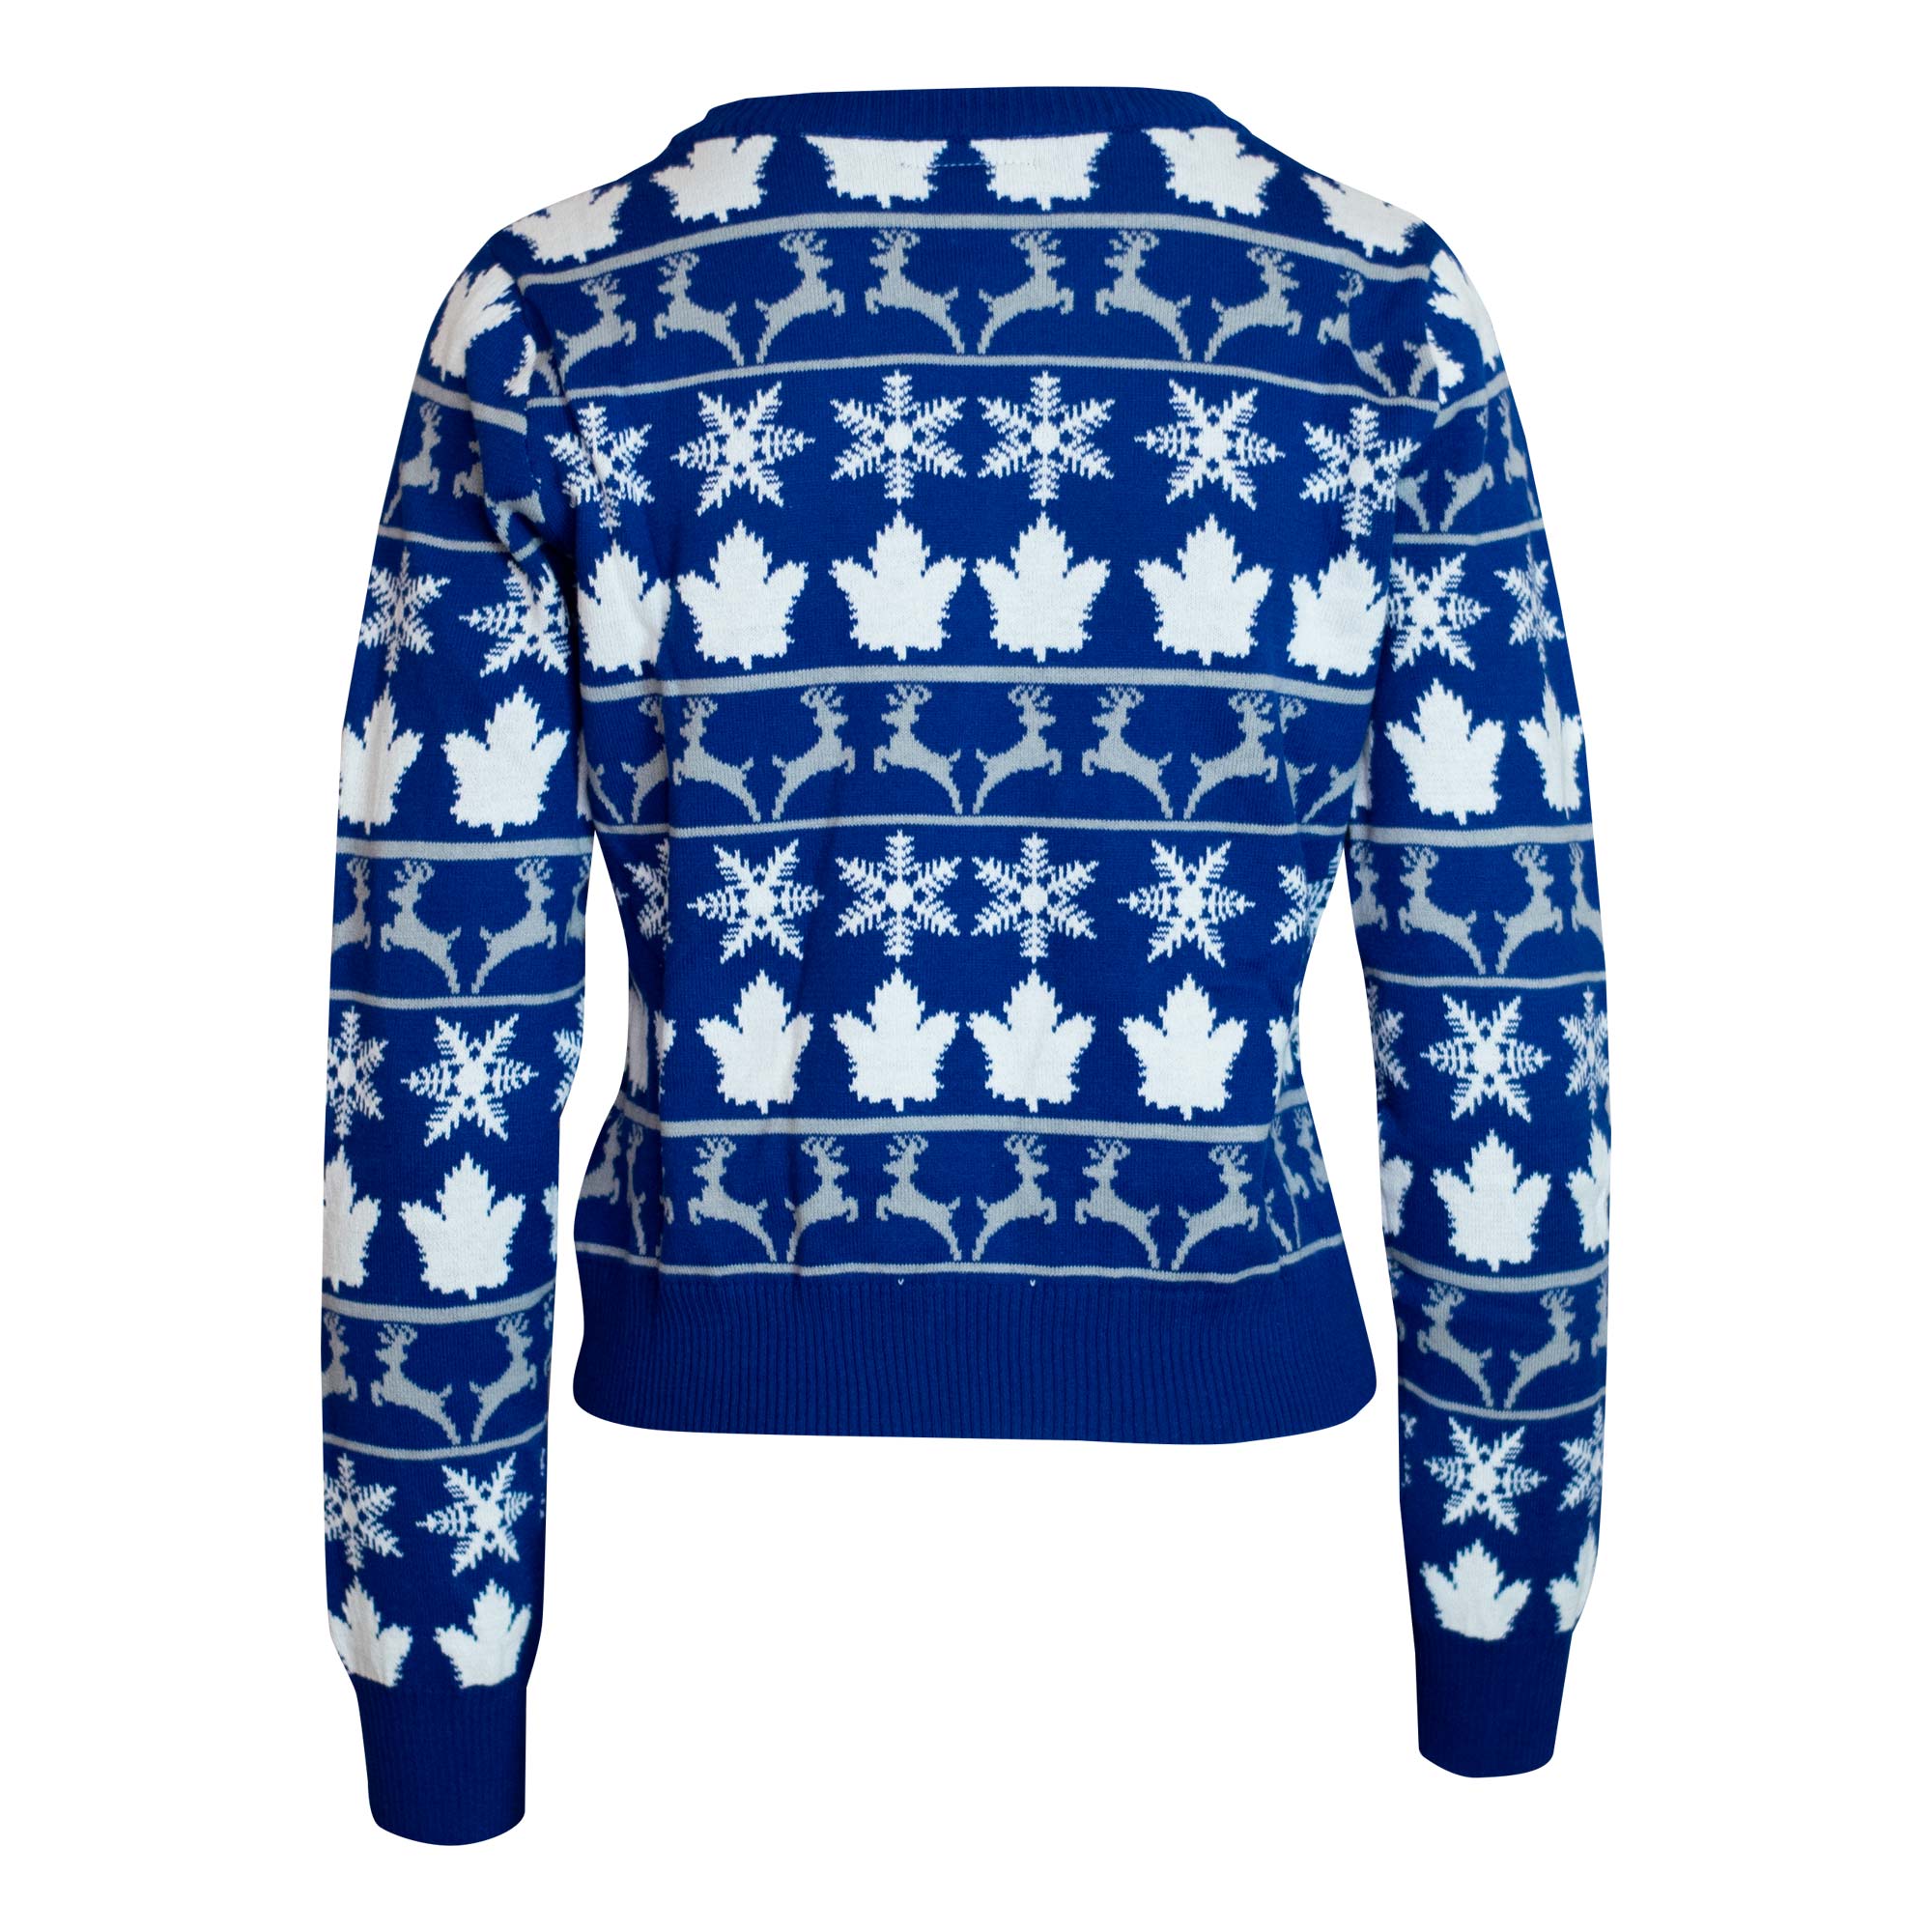 Maple Leafs Ladies Cropped Ugly Christmas Sweater